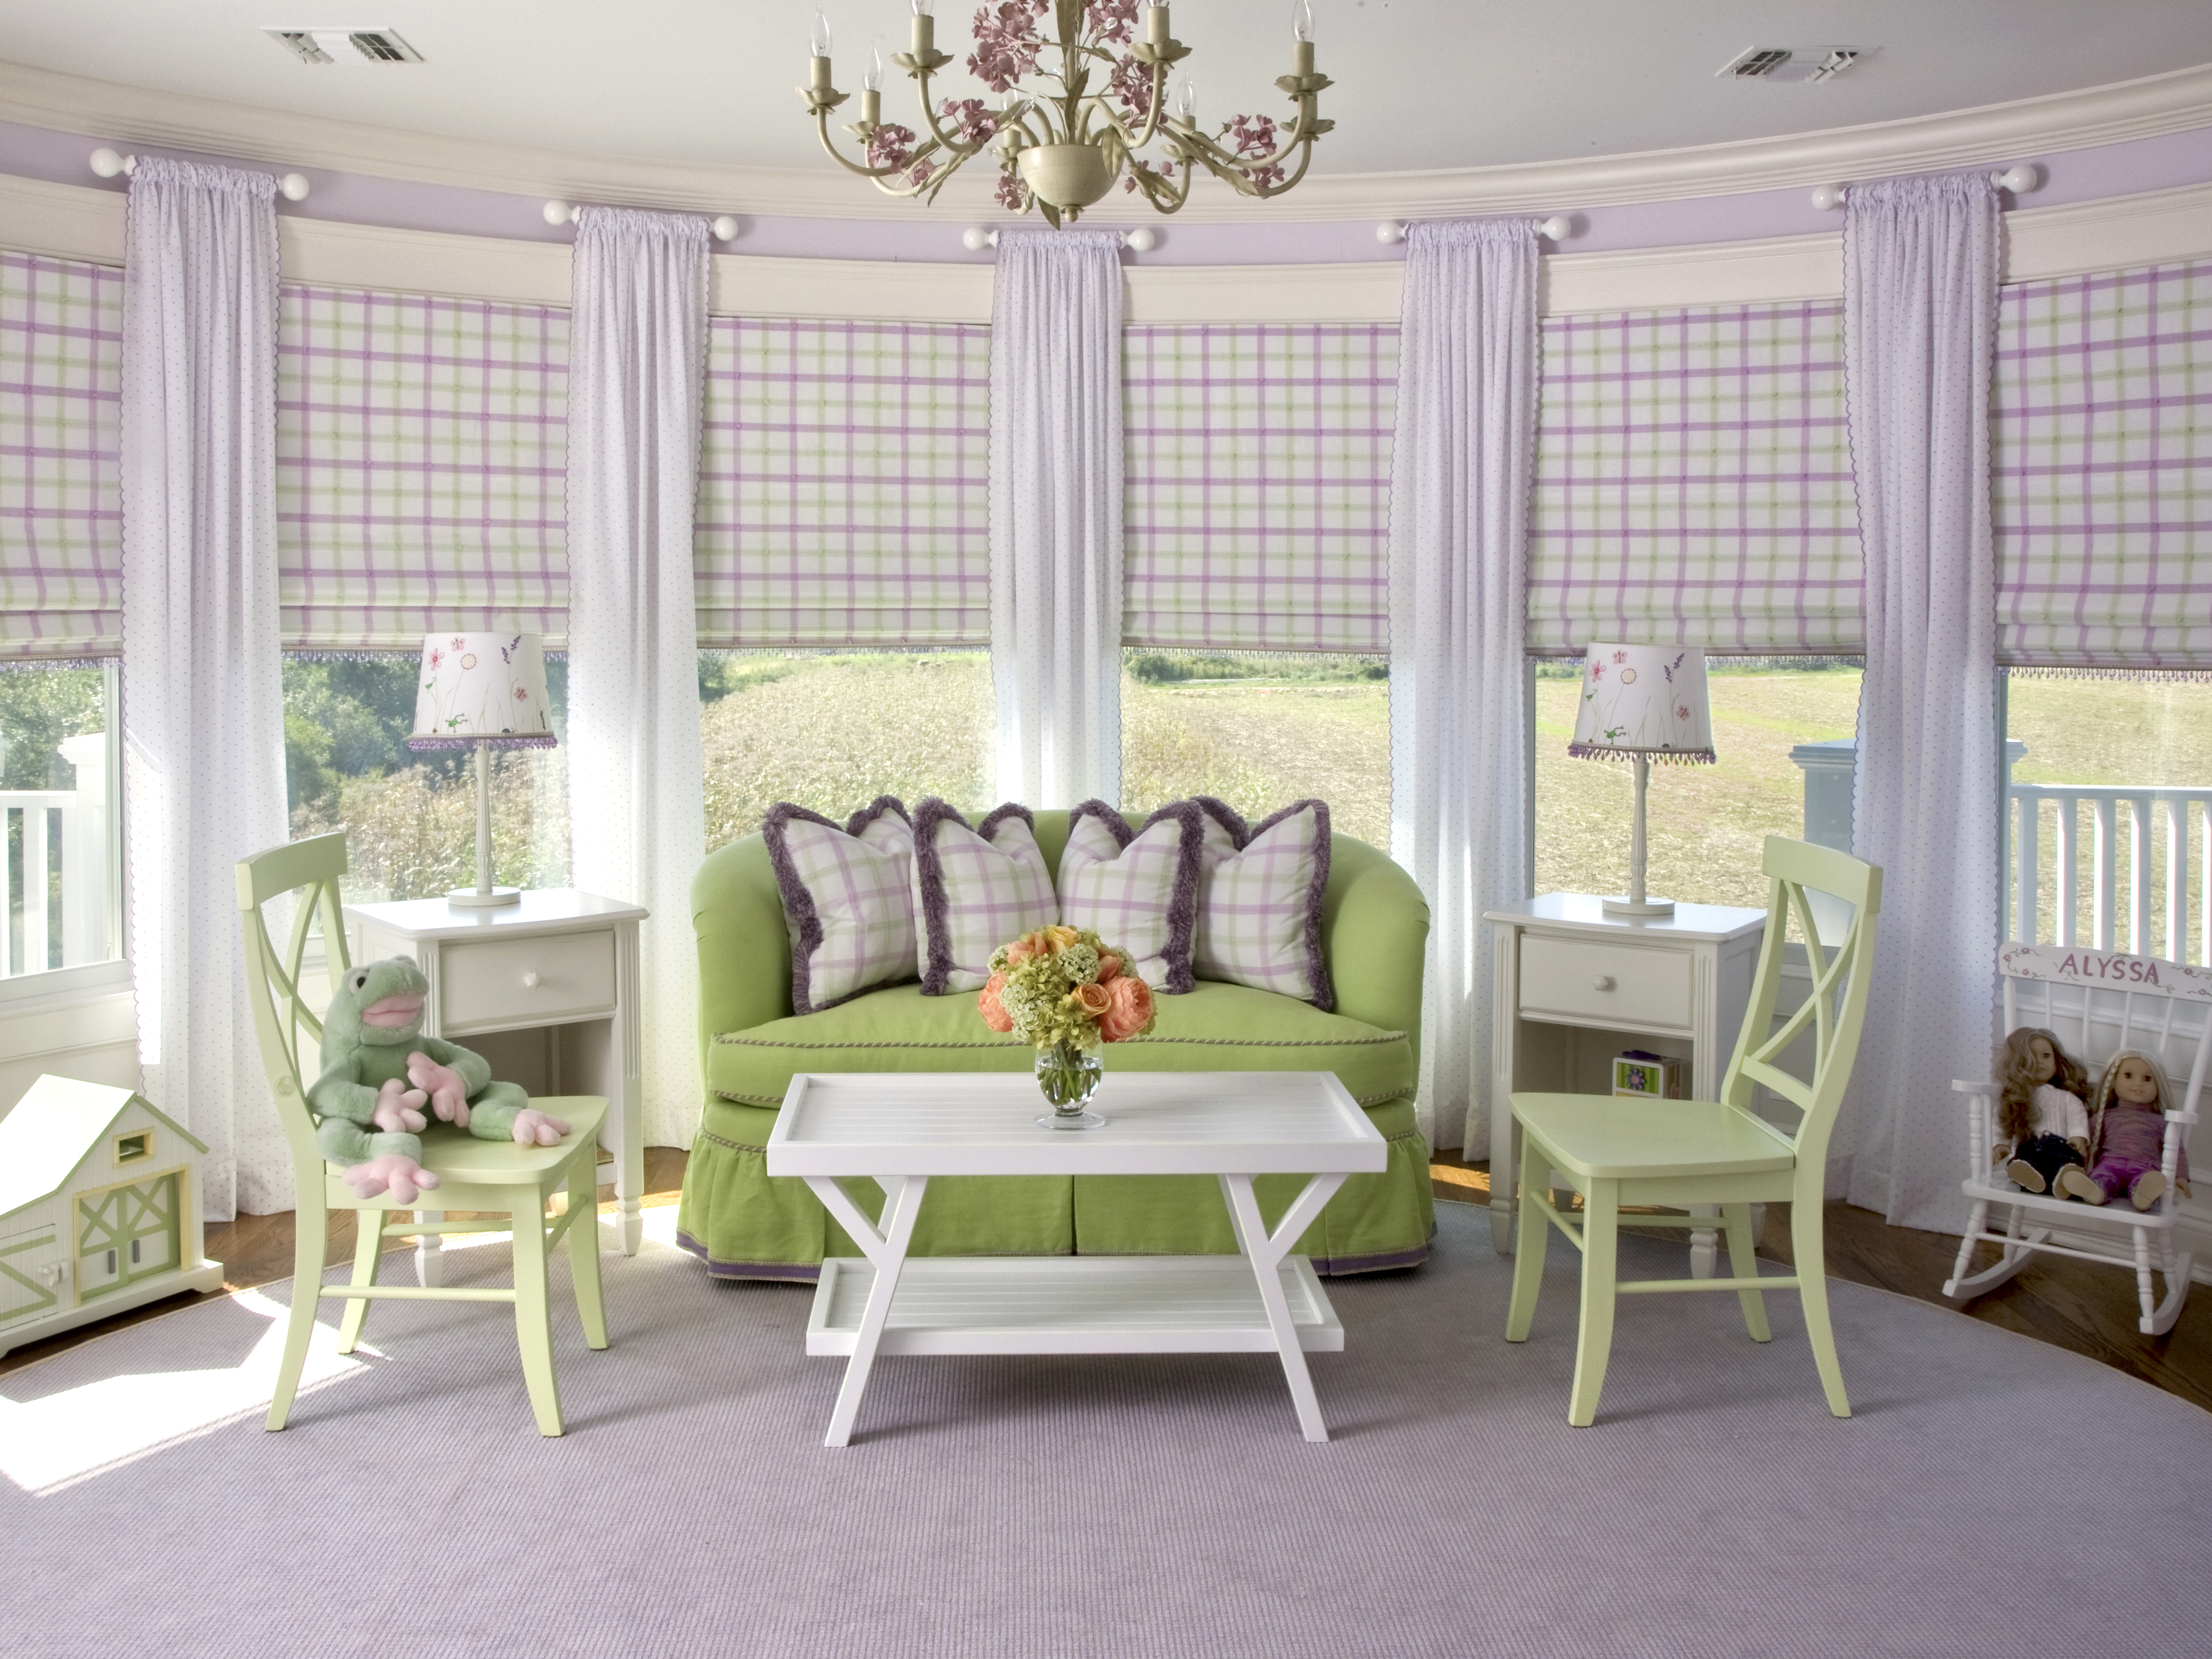 DECORATION WITH BOWS Children Bedroom Window Curtains 